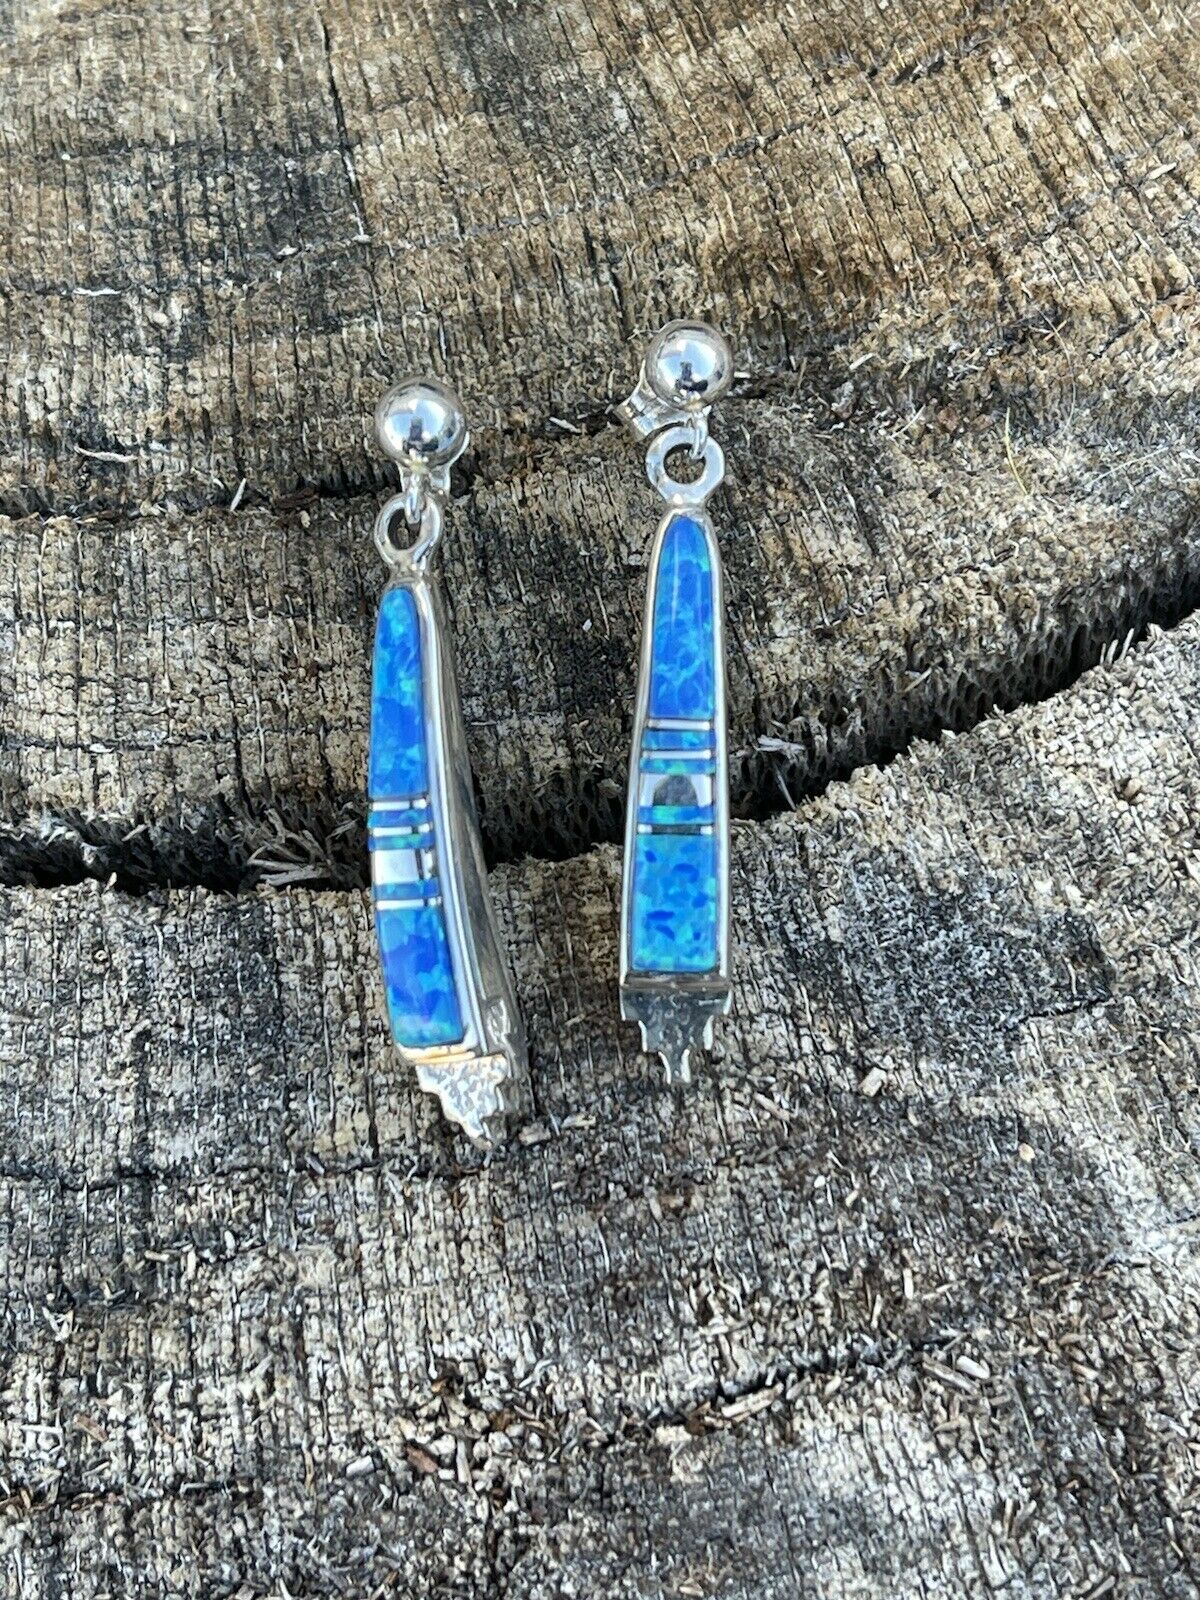 Navajo Blue Opal And Sterling Silver Inlay Dangle Earrings